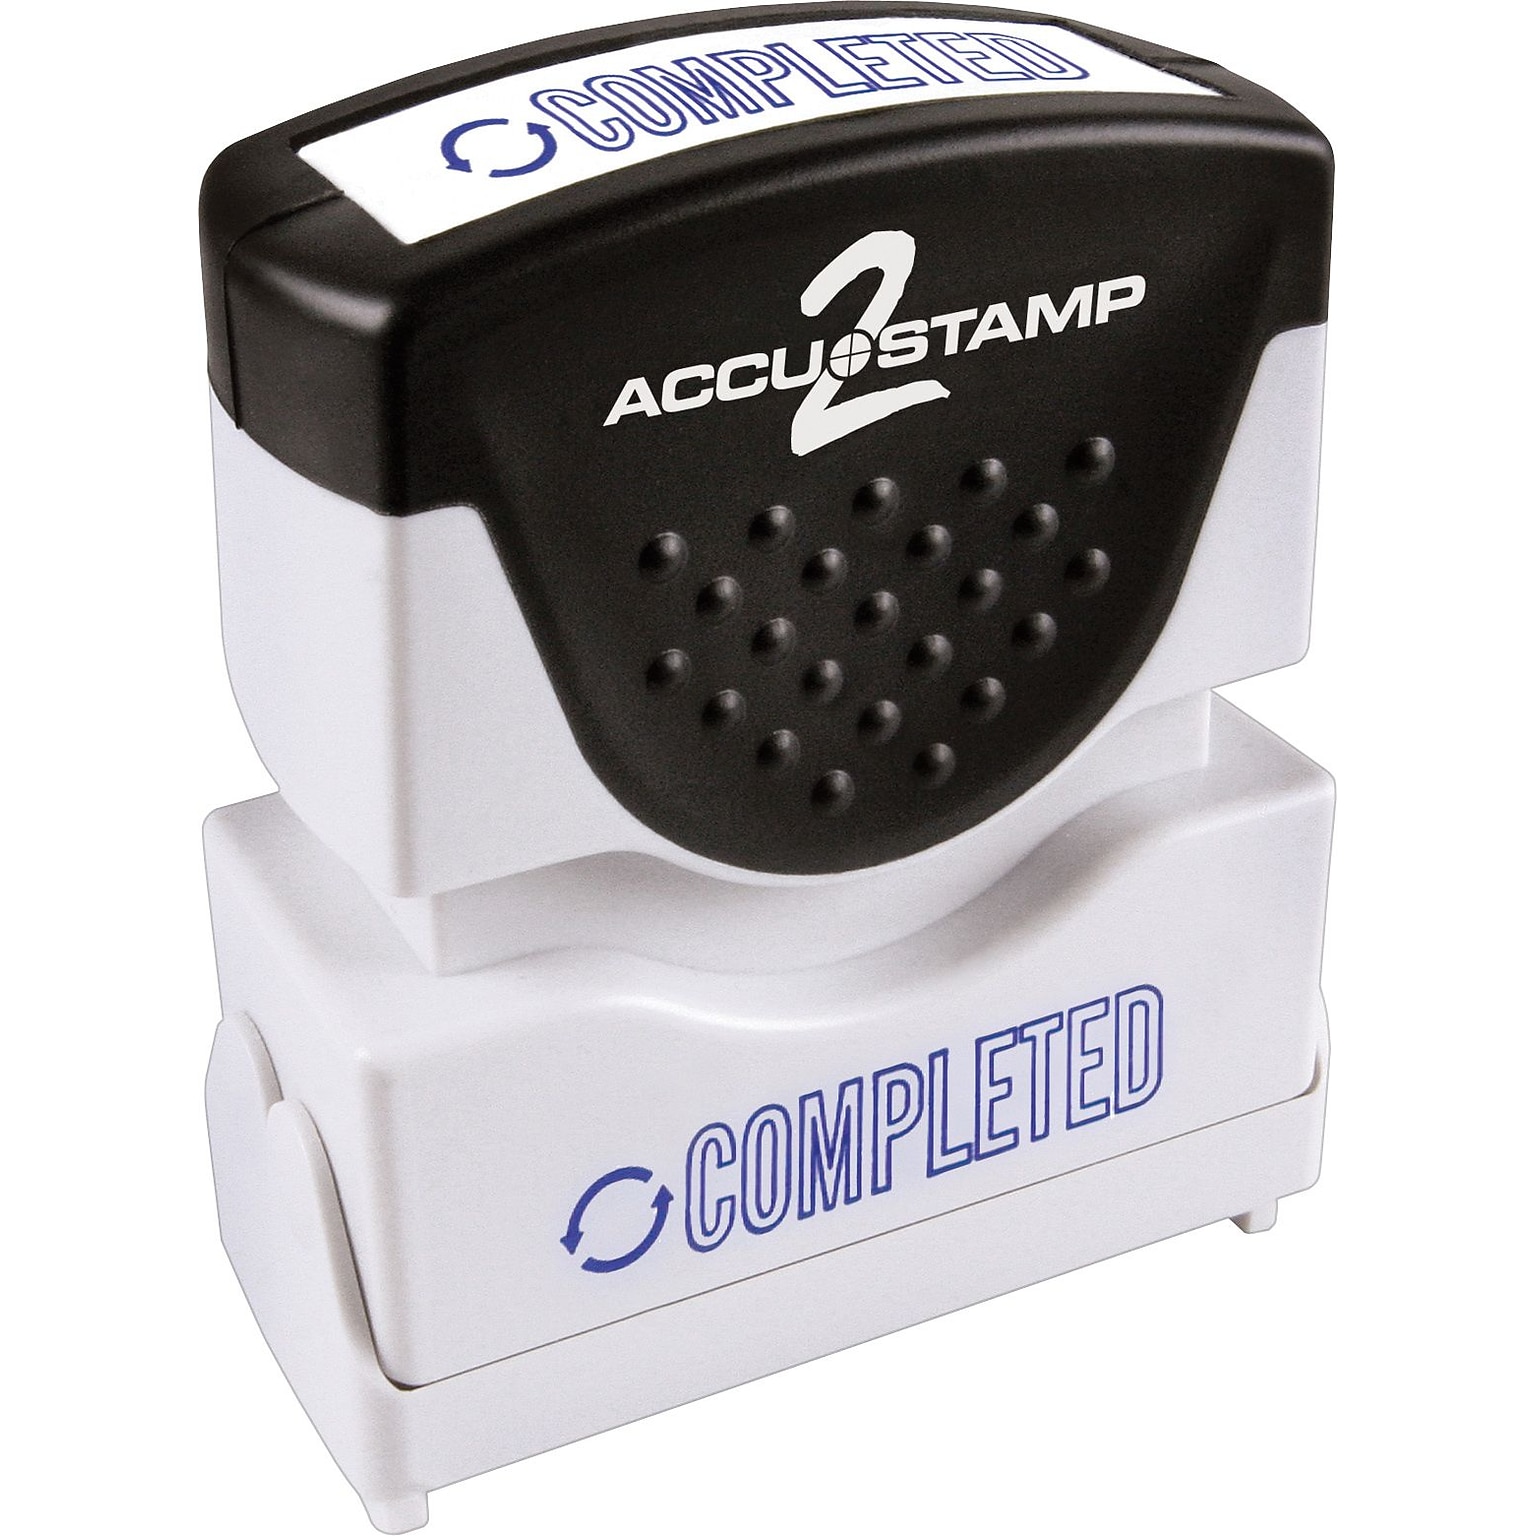 Accu-Stamp2® One-Color Pre-Inked Shutter Message Stamp, COMPLETED, 1/2 x 1-5/8 Impression, Blue Ink (035582)